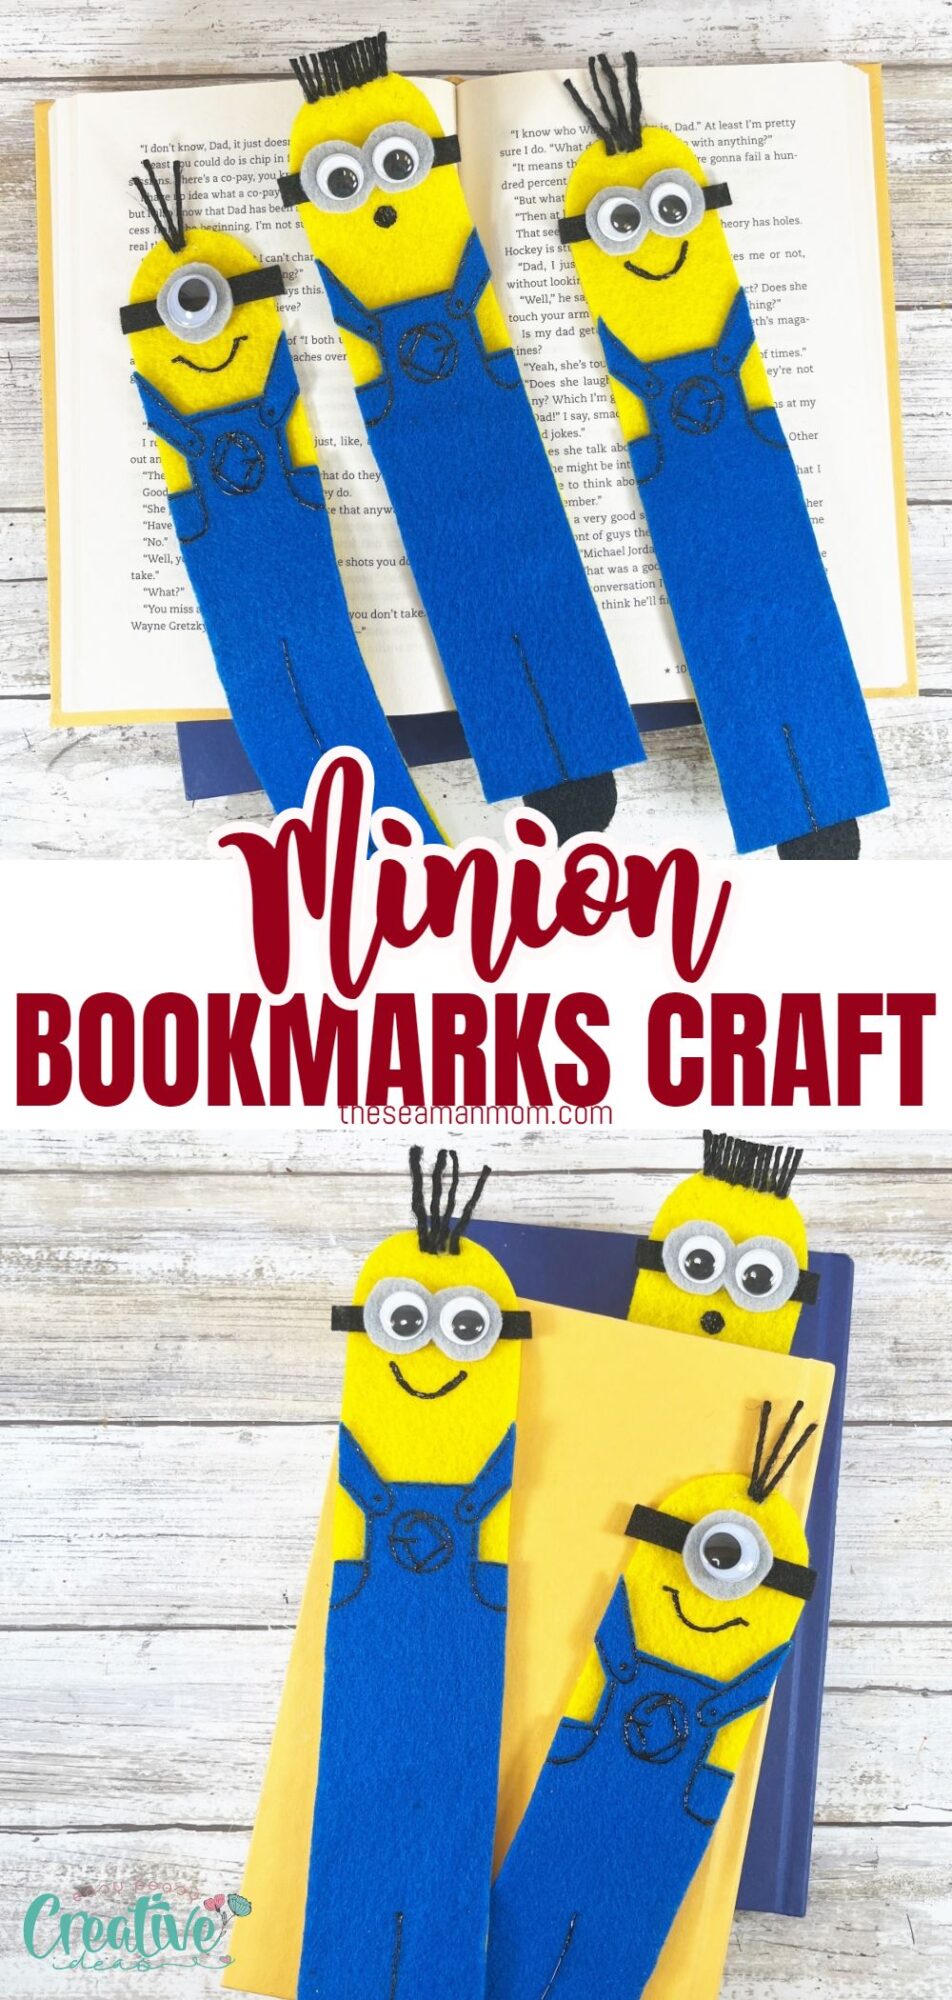 Three adorable minion bookmarks crafted with colorful paper and googly eyes. Perfect for marking your spot in your favorite books!